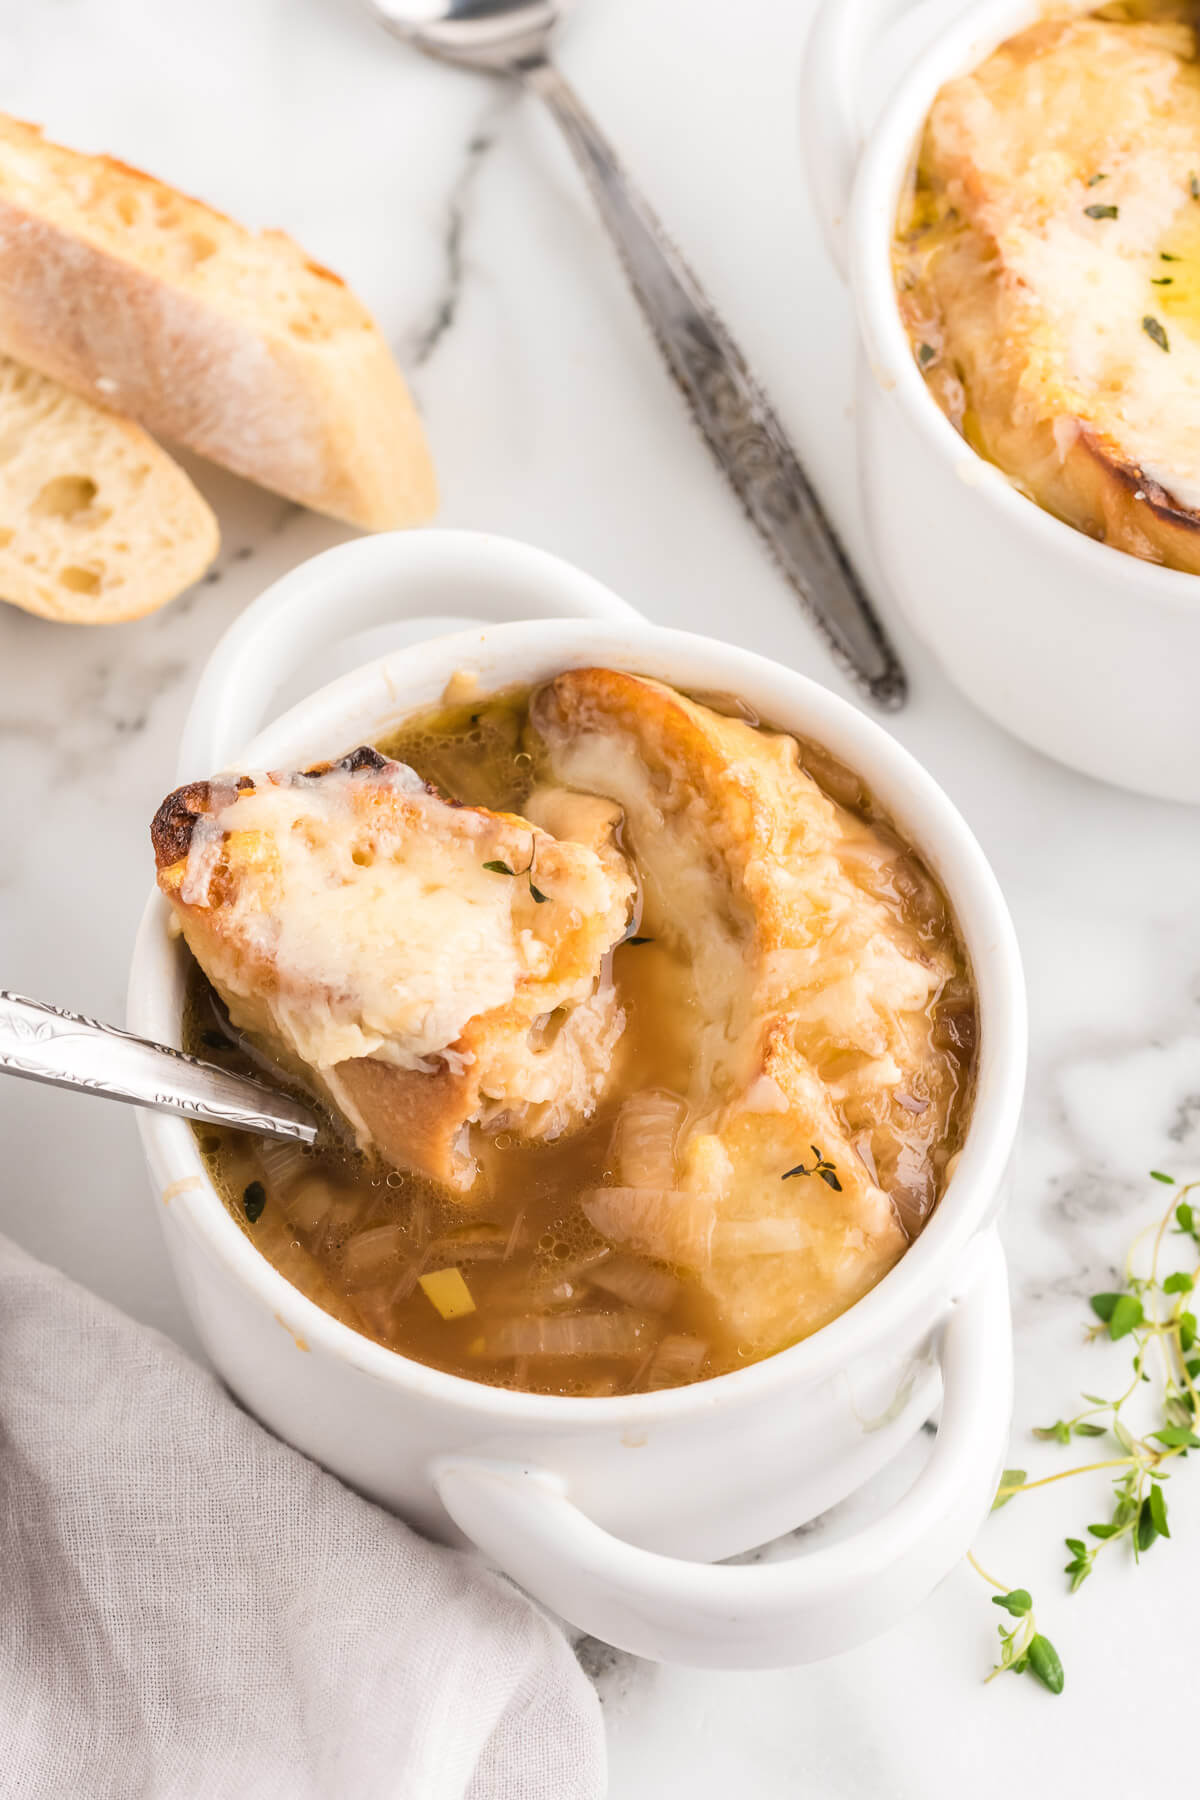 French onion soup in a soup crock with a spoon lifting out a bite of cheesy bread.